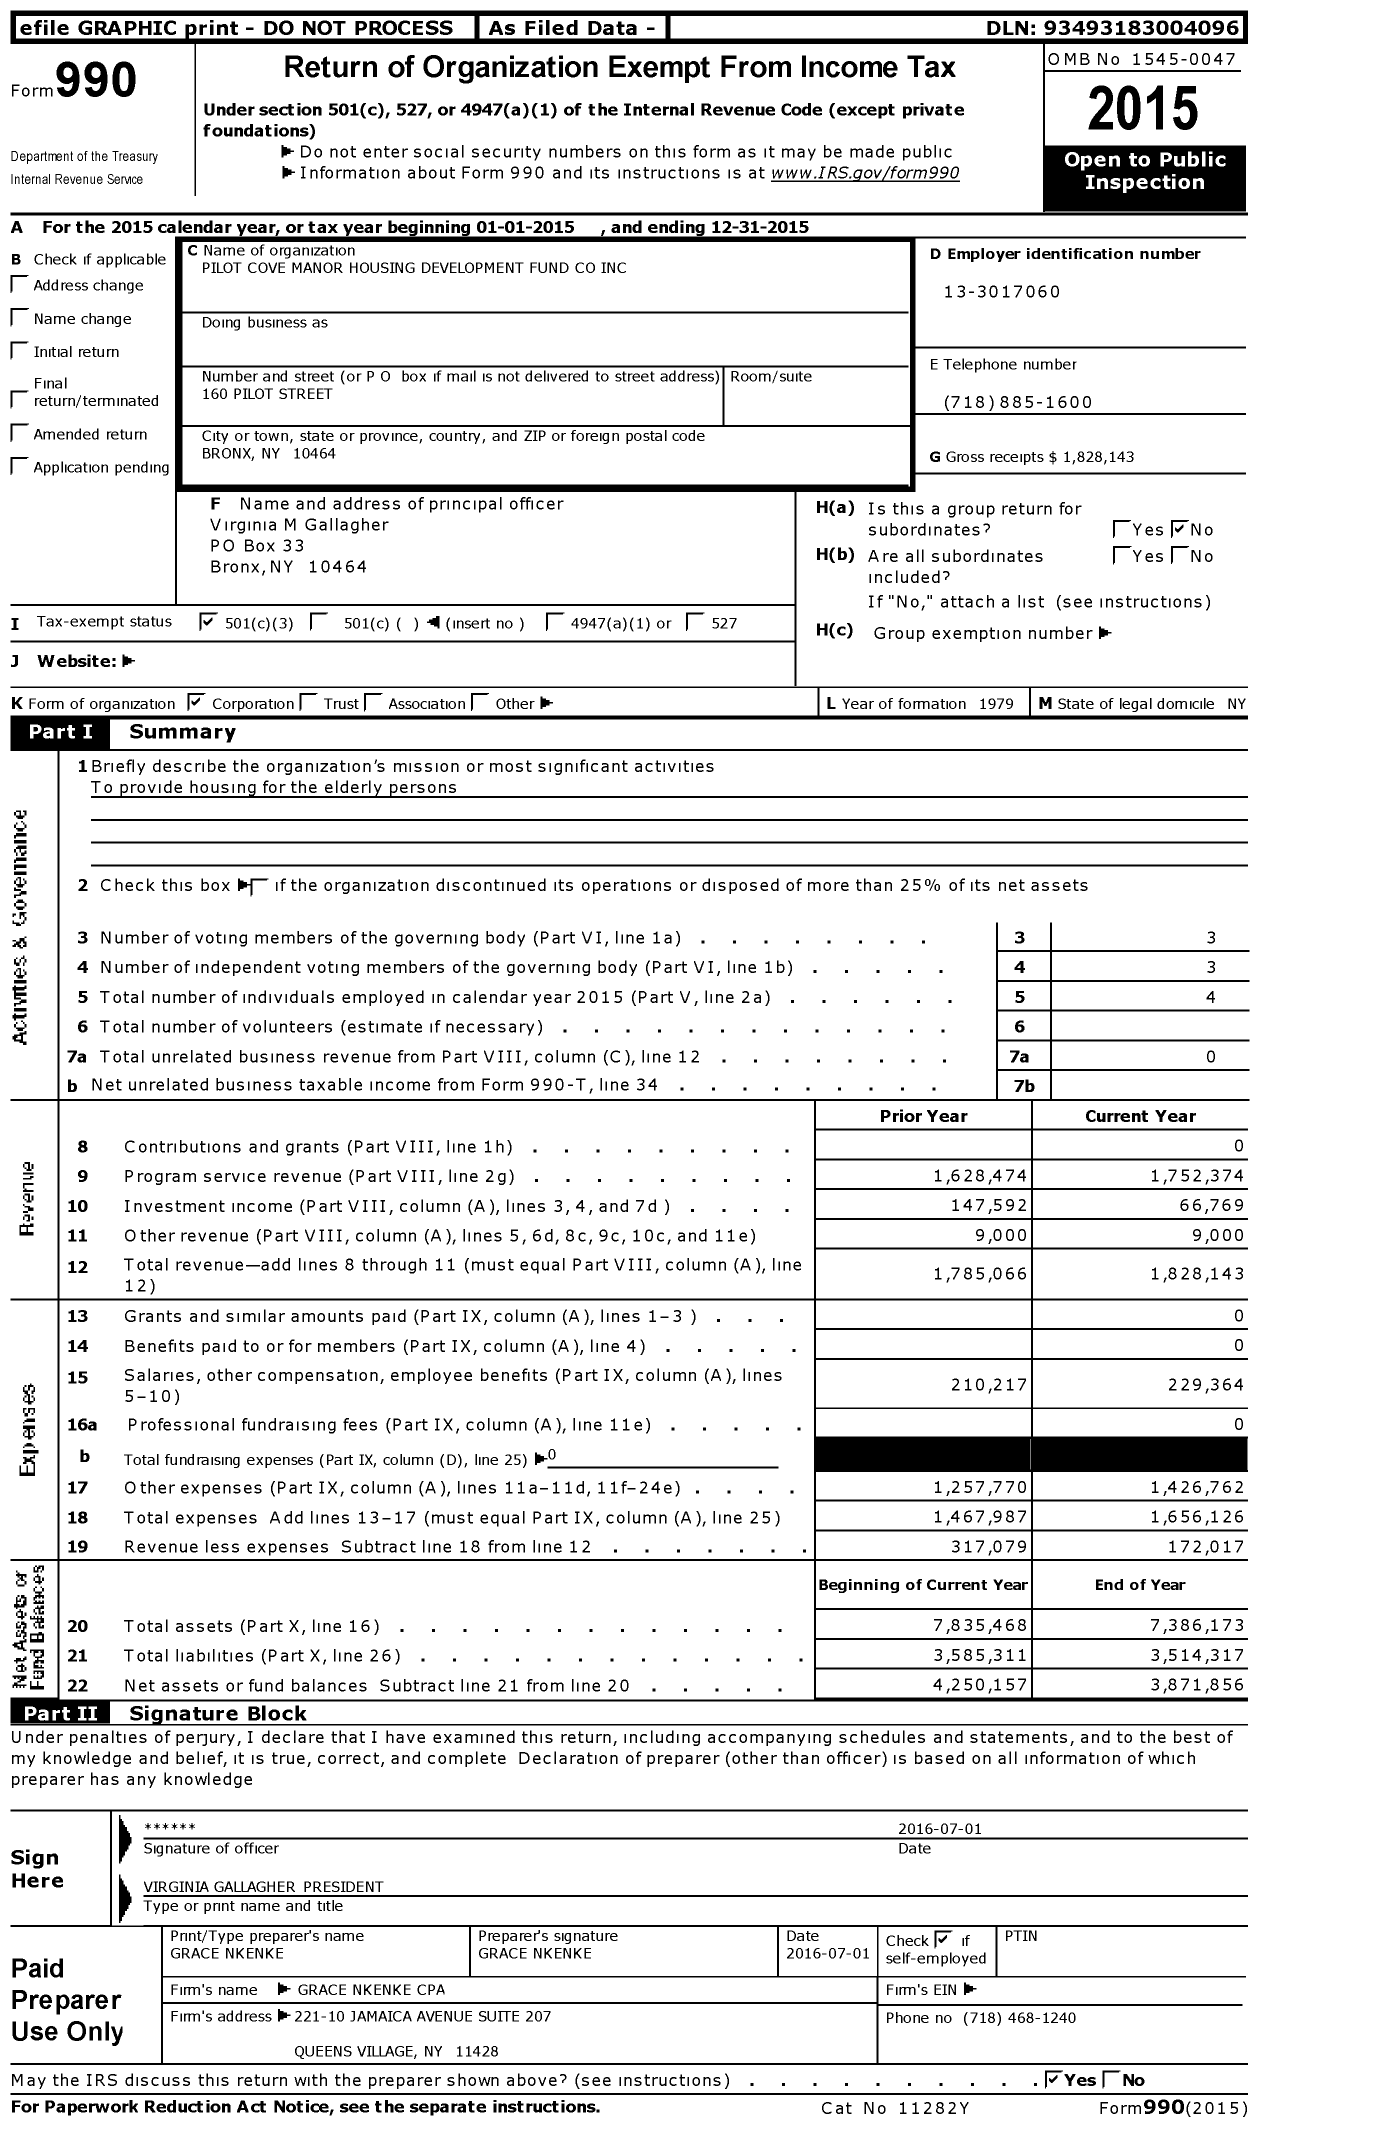 Image of first page of 2015 Form 990 for Pilot Cove Manor Housing Development Fund